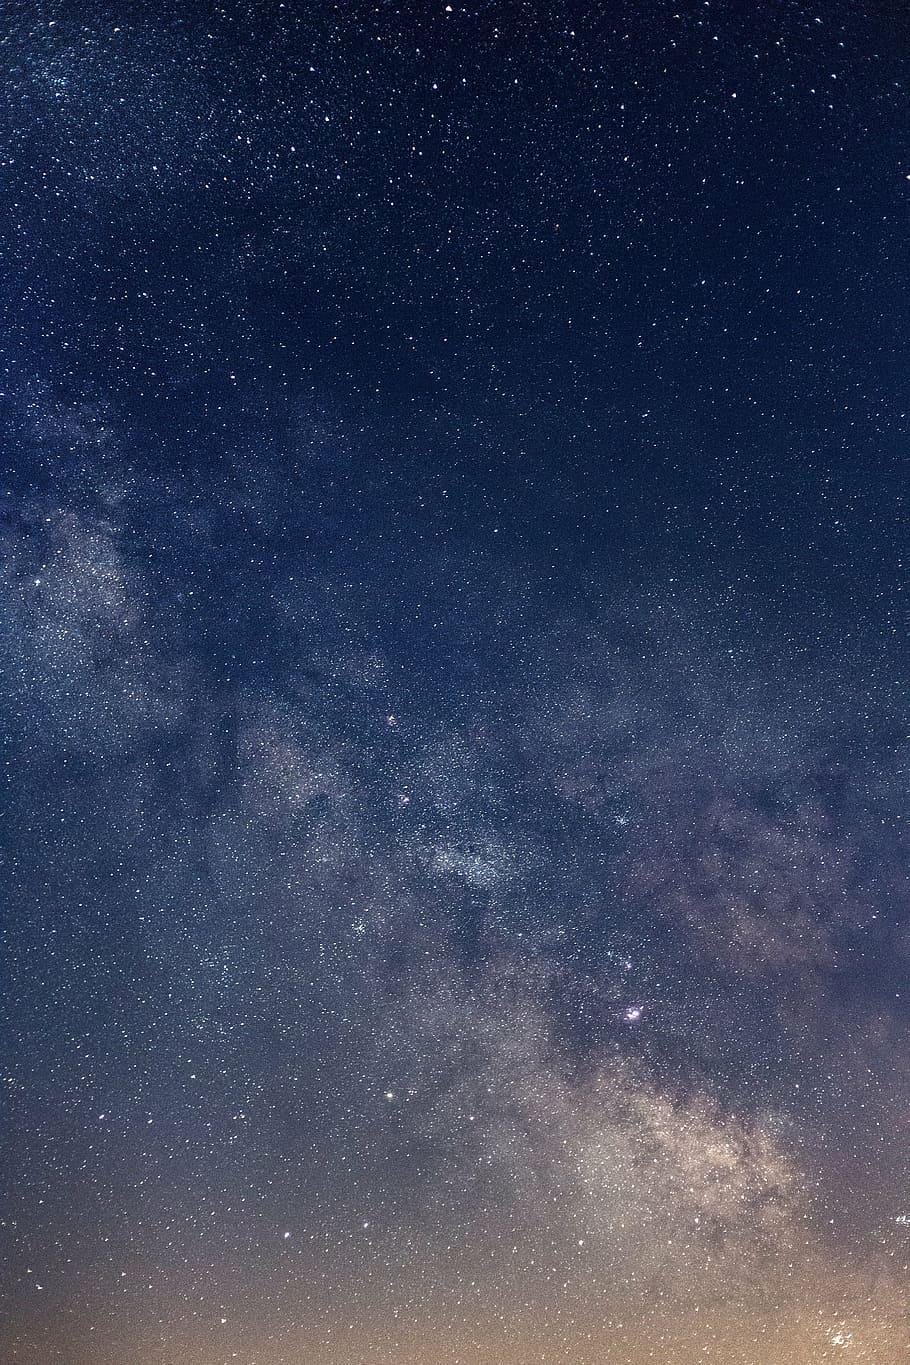 sky during nighttime, astronomy, constellations, milky way, nature, night, sky, stars, star - space, galaxy